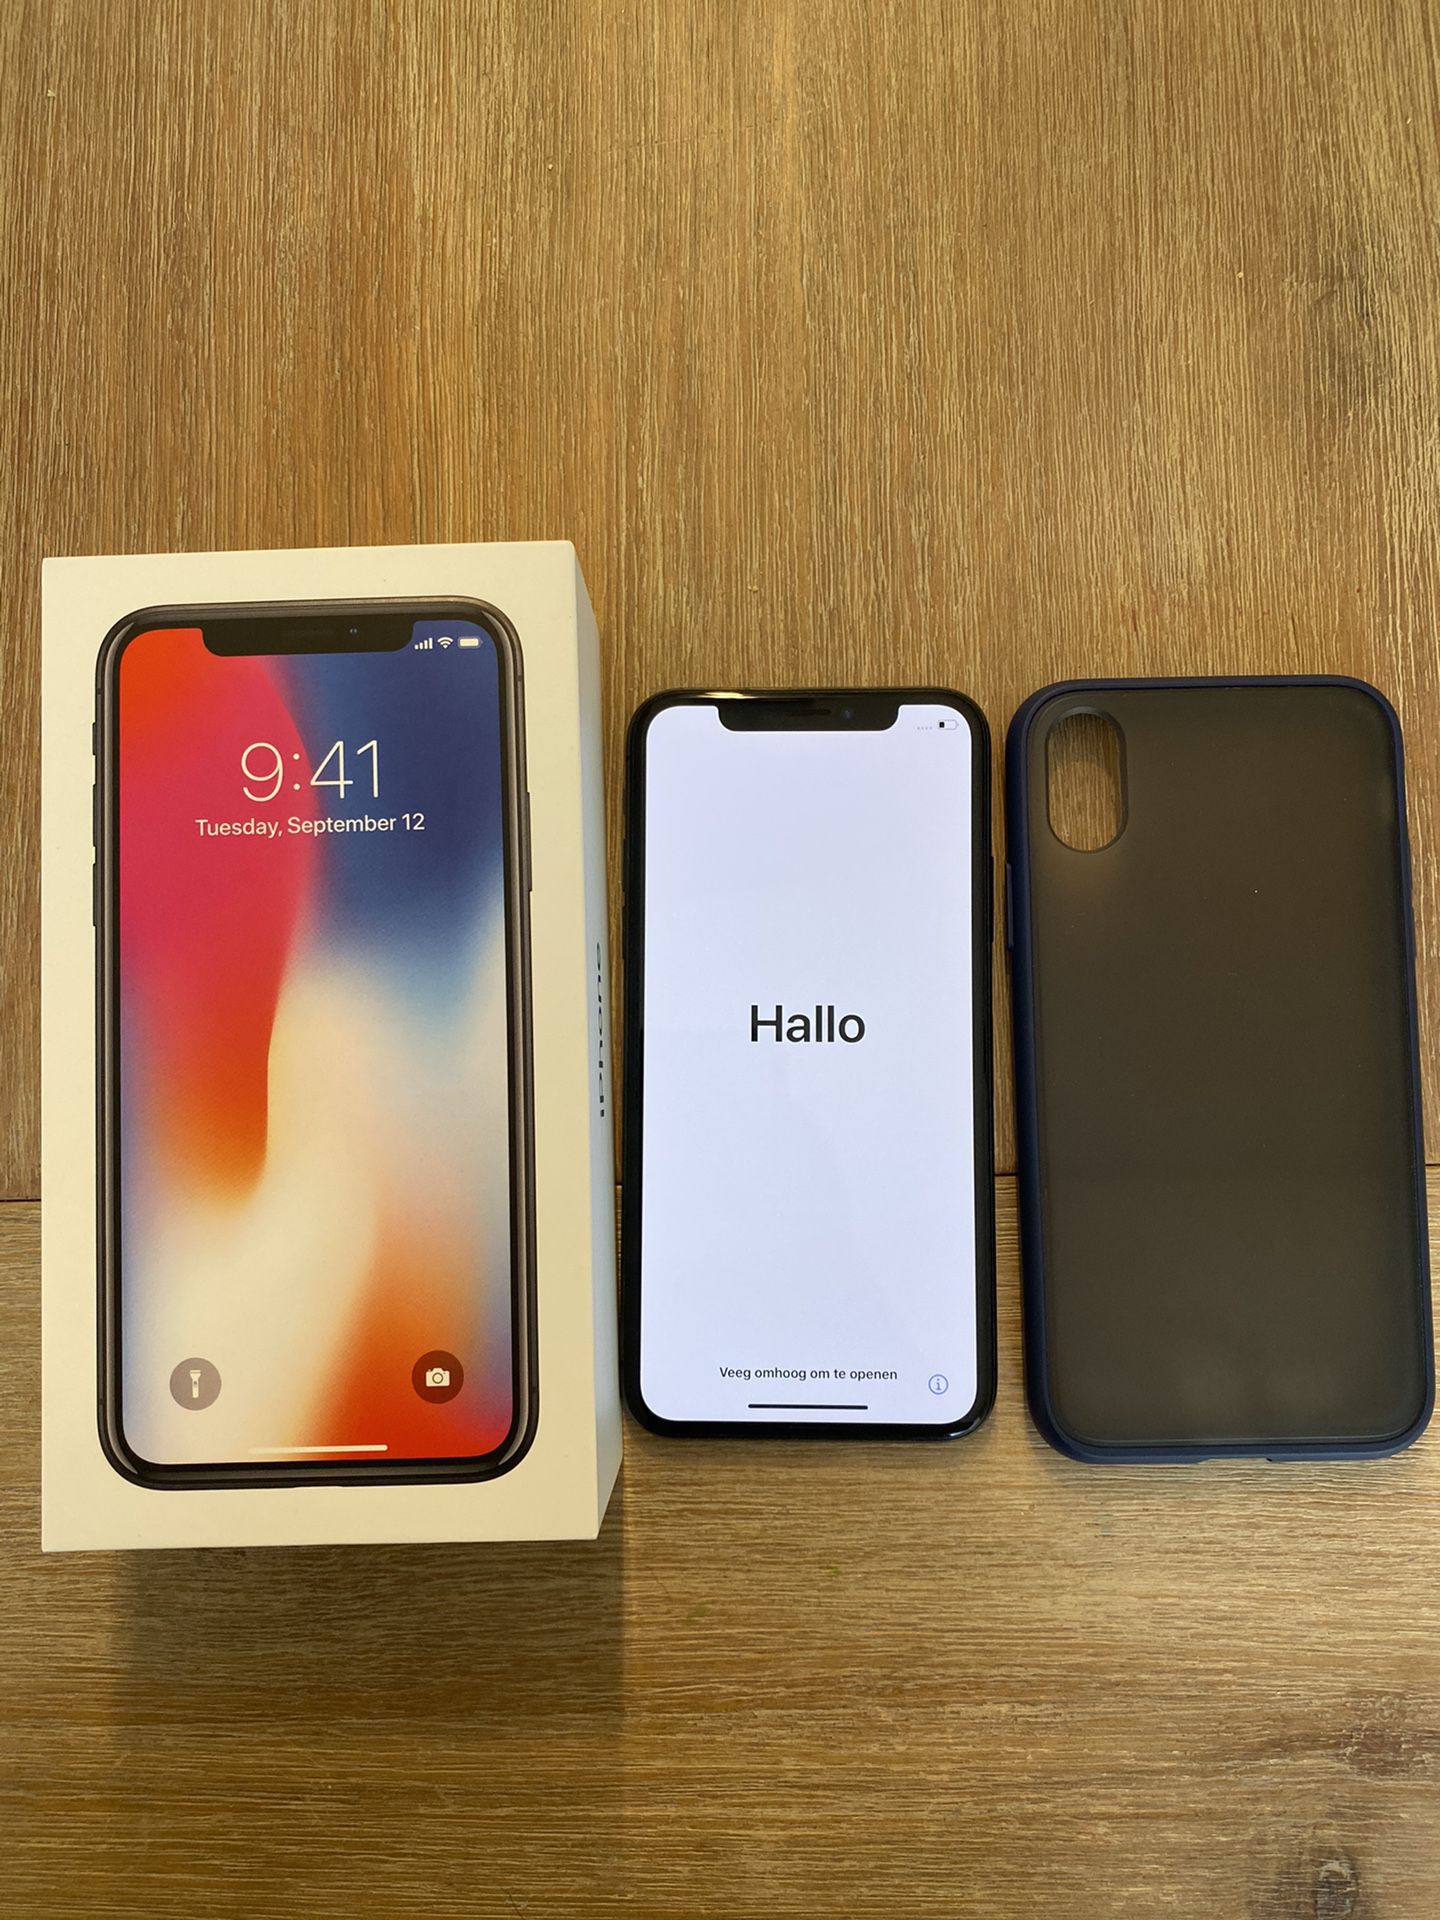 IPHONE X 10 - 256 GB - GREAT CONDITION